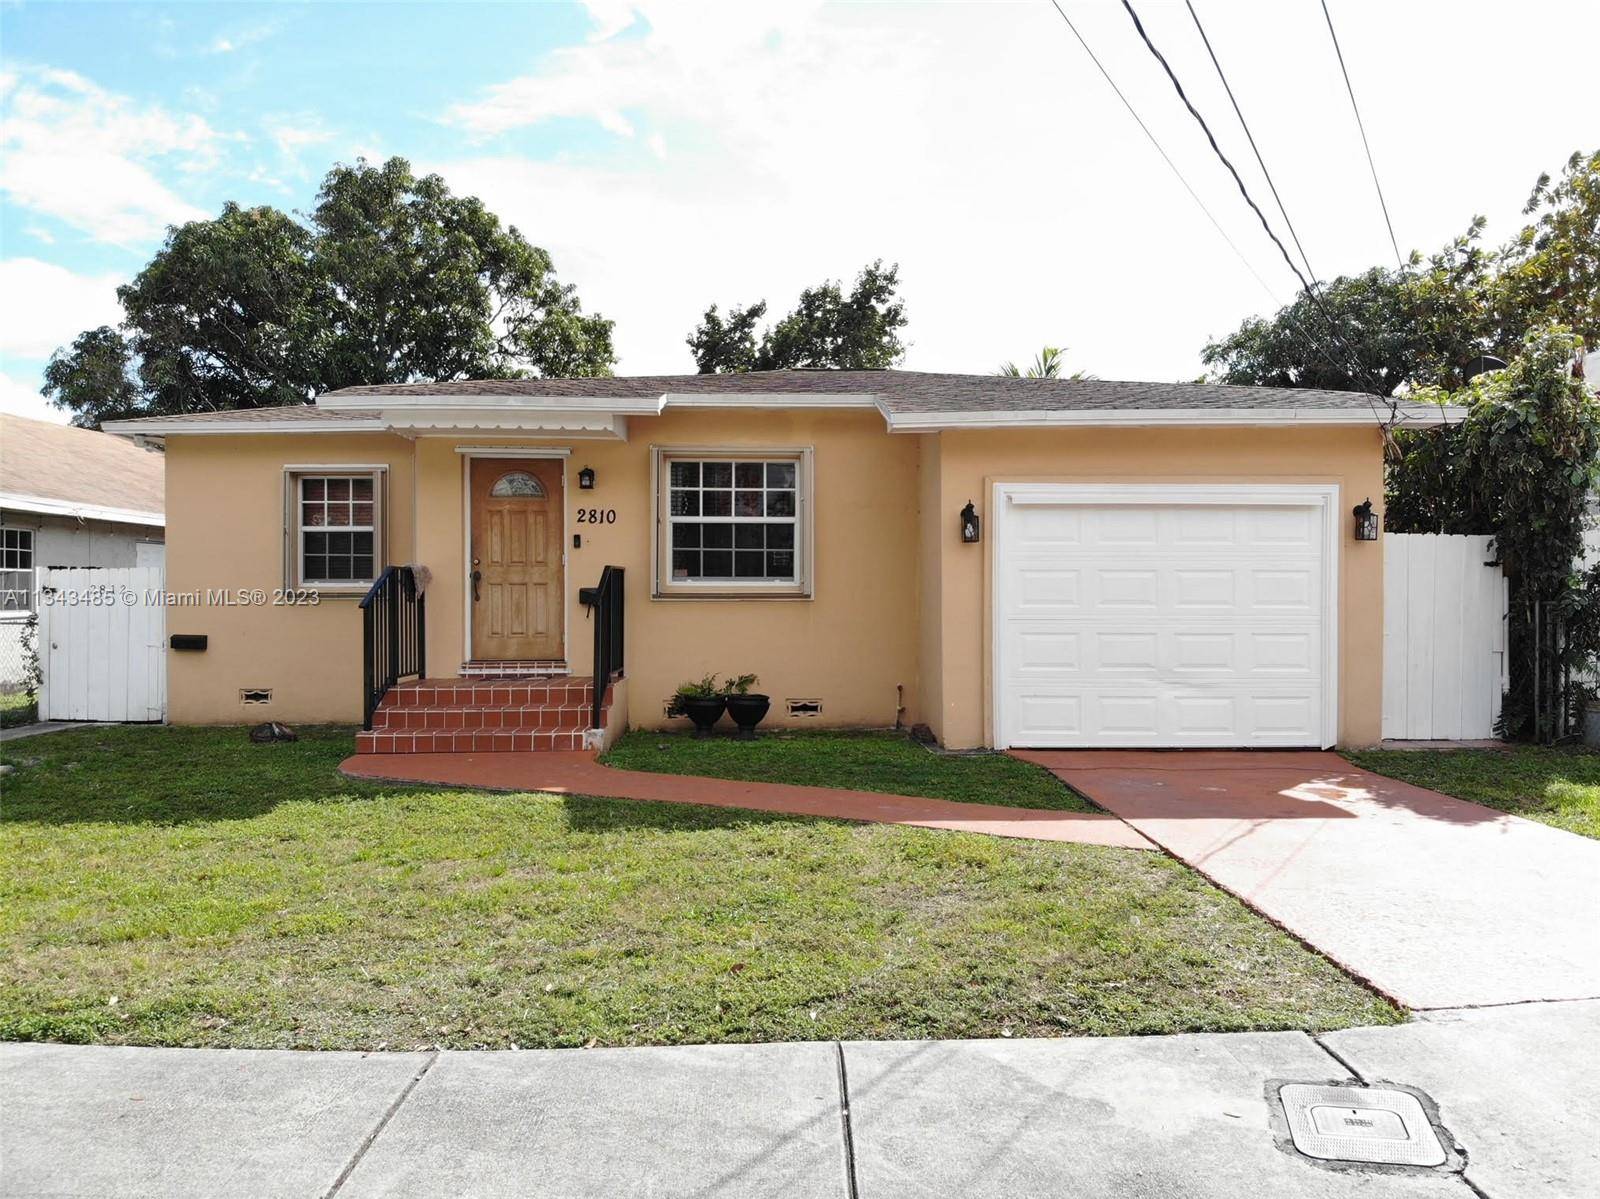 Great opportunity for investors or a large family looking to settle in a remarkable area, fully remodeled Duplex.